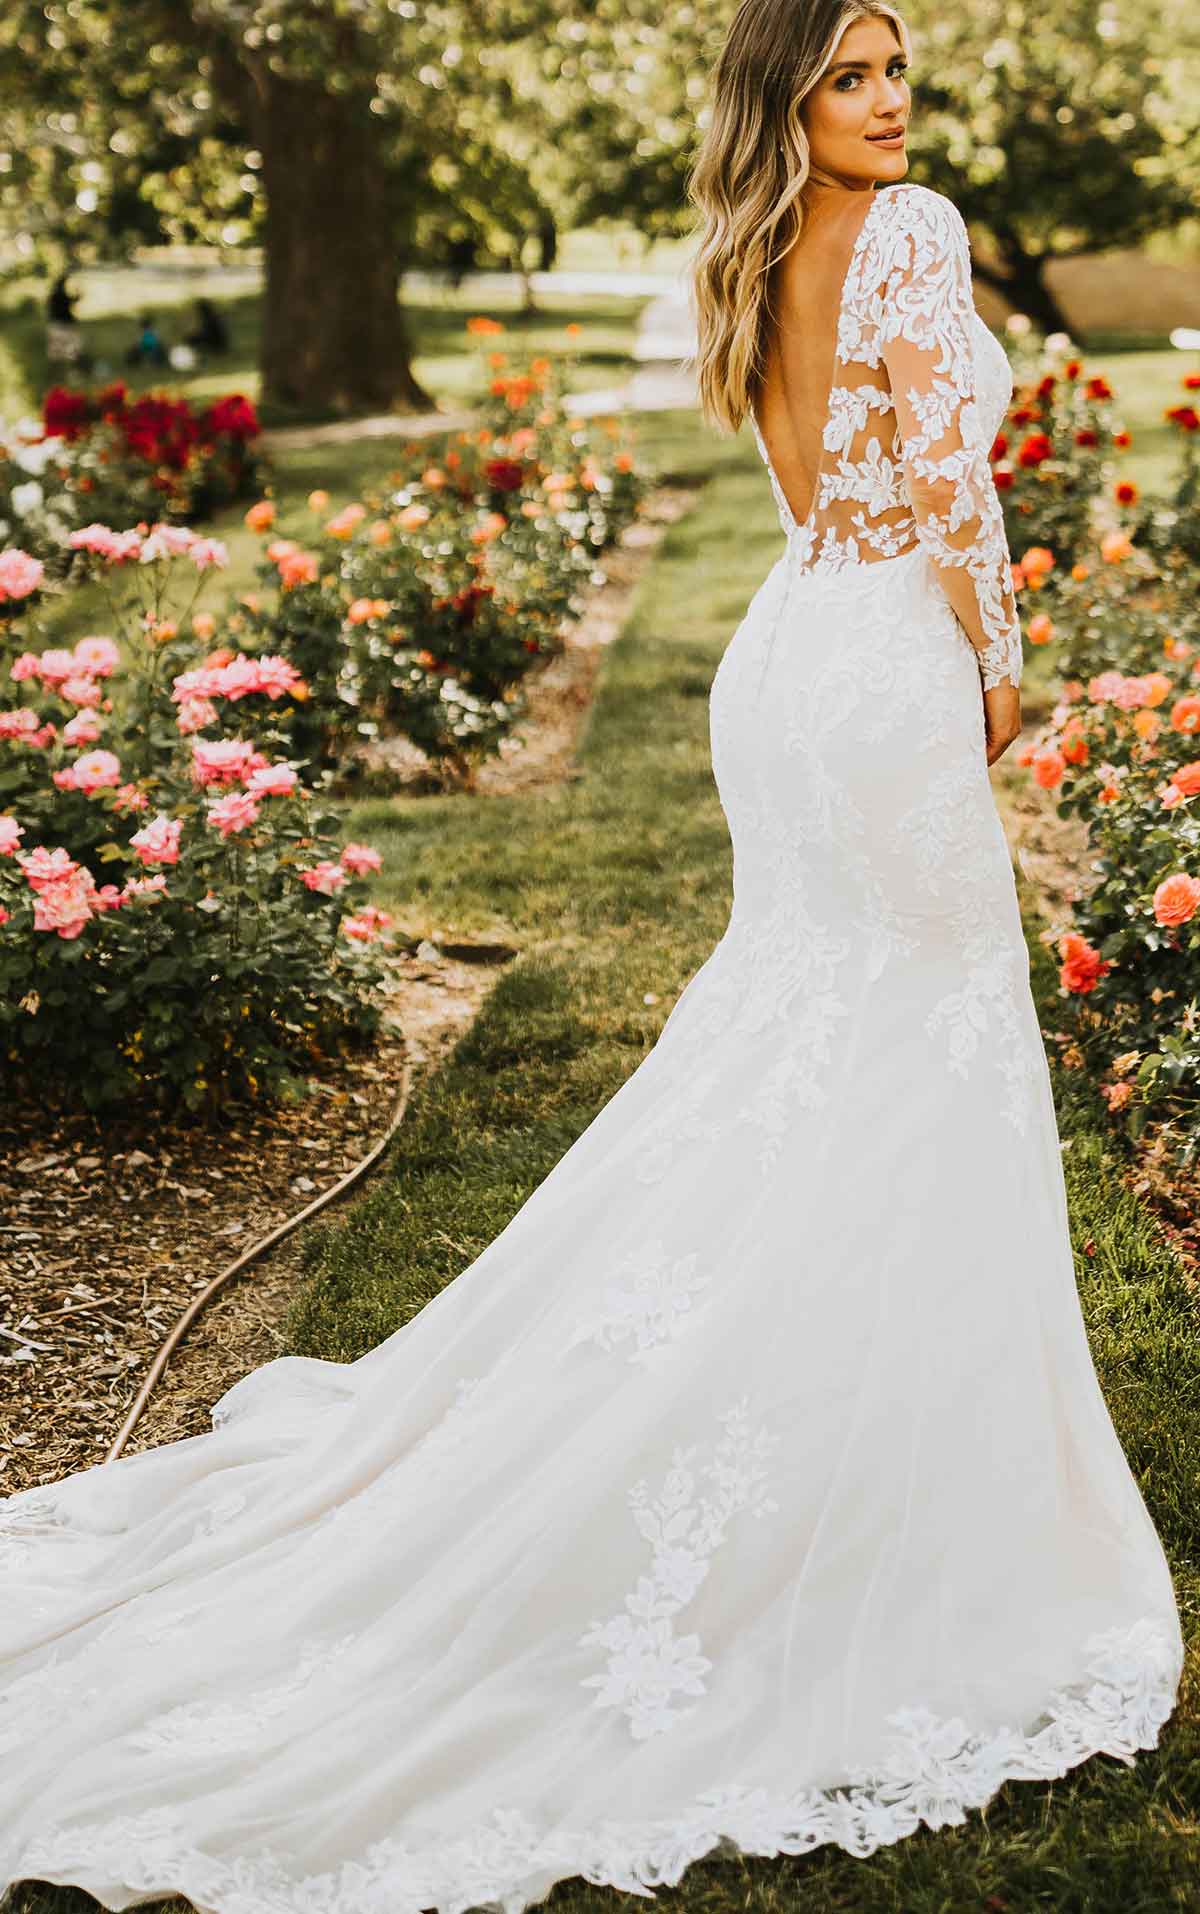 7420 - Sexy Long-Sleeve Lace Wedding Dress with Cutouts and Full